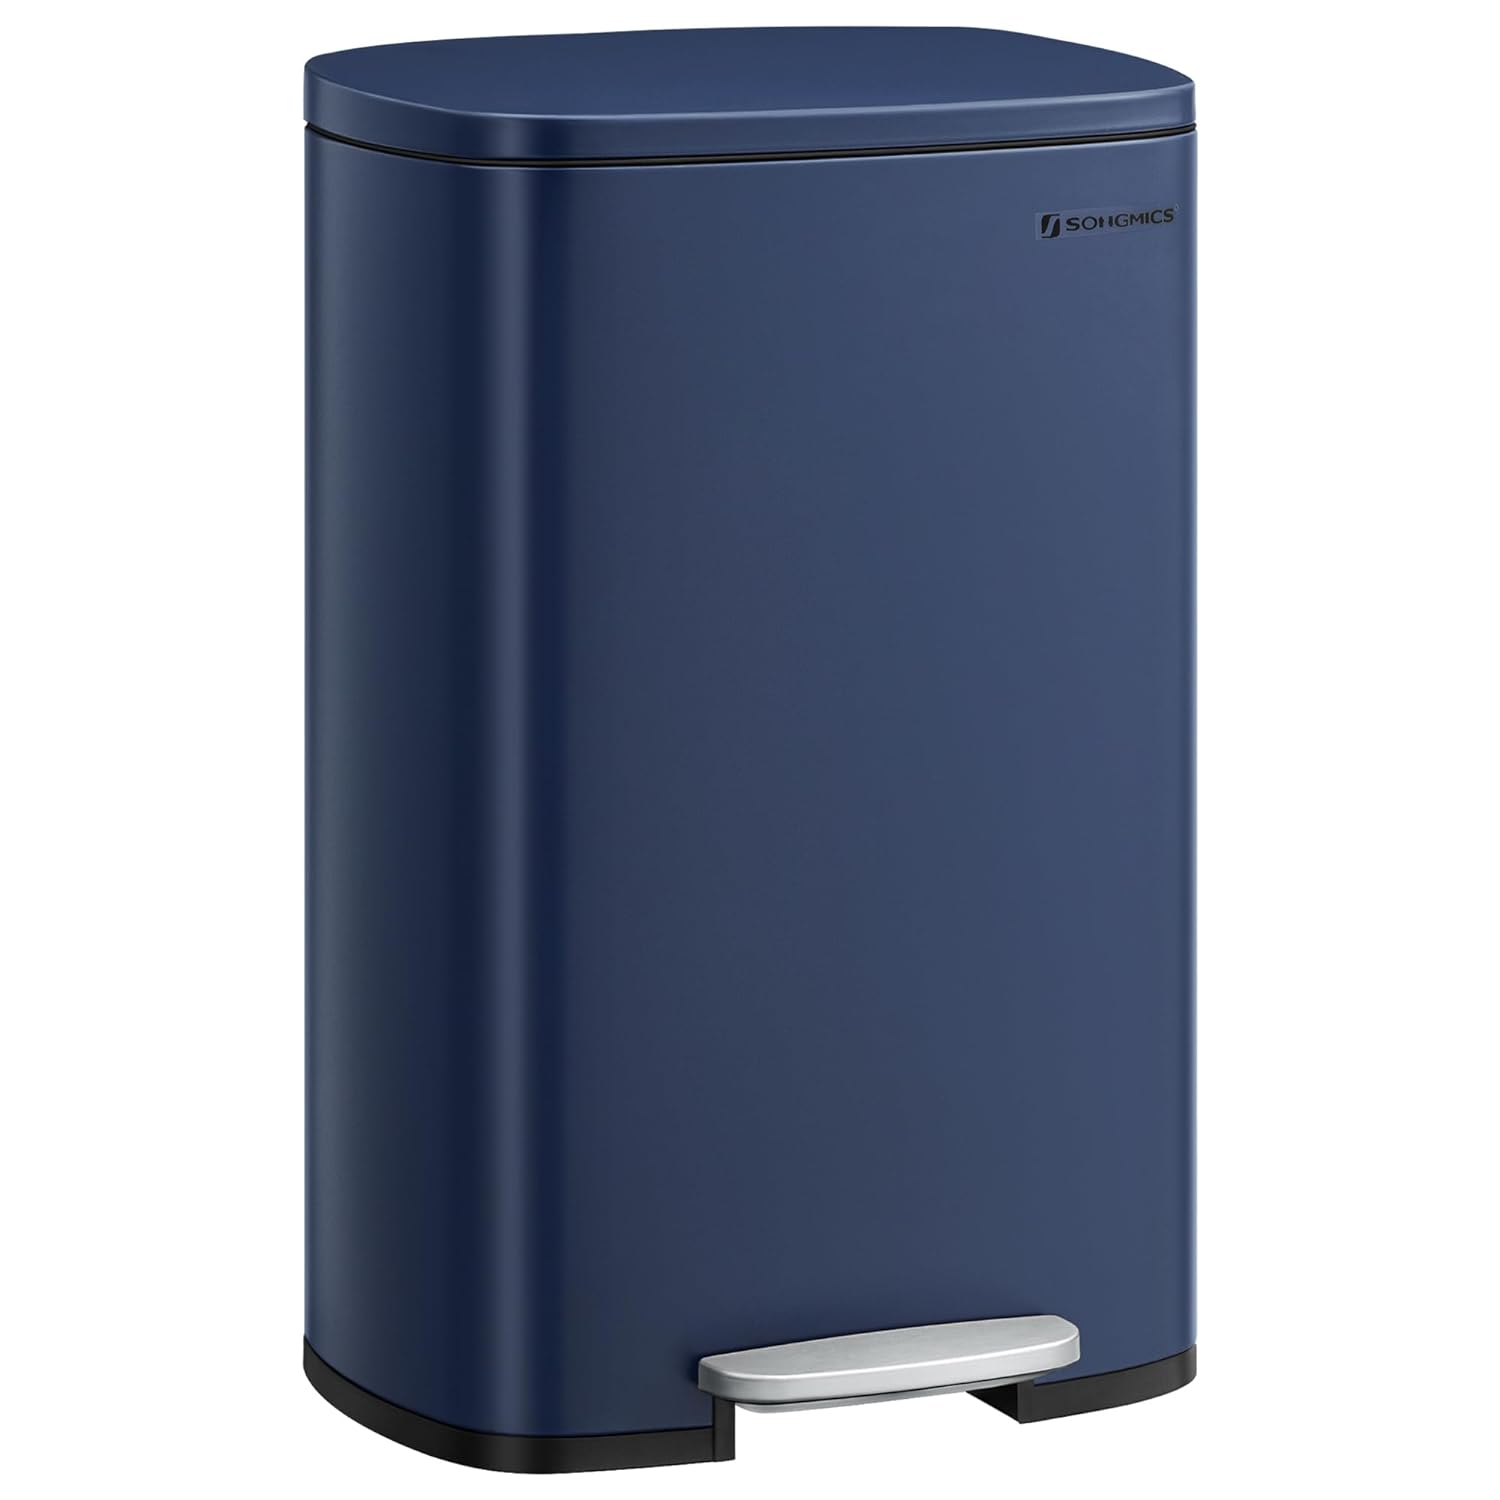 https://bigbigmart.com/wp-content/uploads/2023/11/SONGMICS-13-Gallon-Trash-Can-Stainless-Steel-Kitchen-Garbage-Can-Recycling-or-Waste-Bin-Soft-Close-Step-On-Pedal-Removable-Inner-Bucket-Midnight-Blue-ULTB050L01.jpg